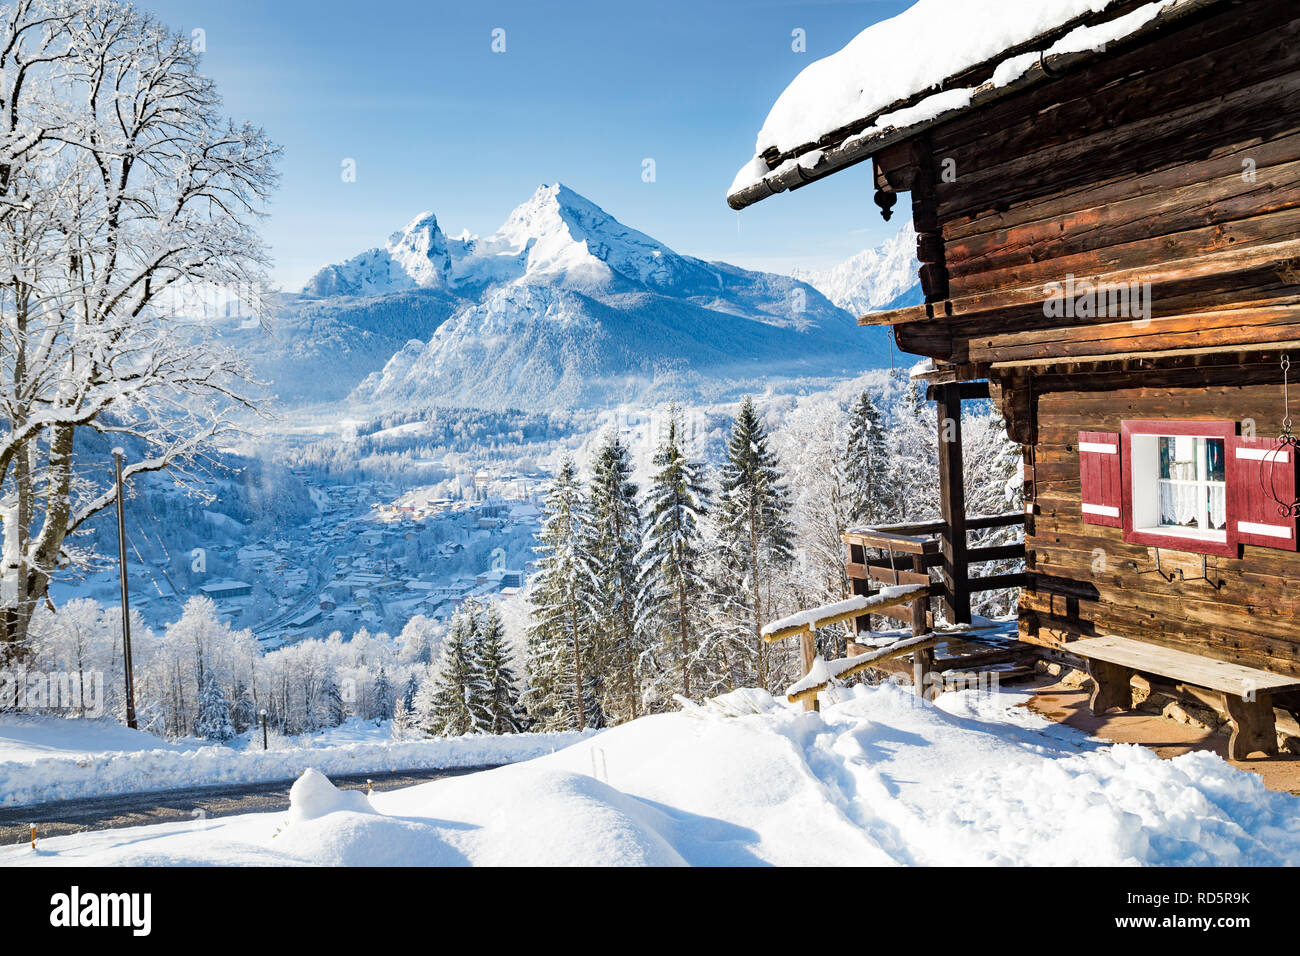 Beautiful view of traditional wooden mountain cabin in scenic winter wonderland mountain scenery in the Alps Stock Photo